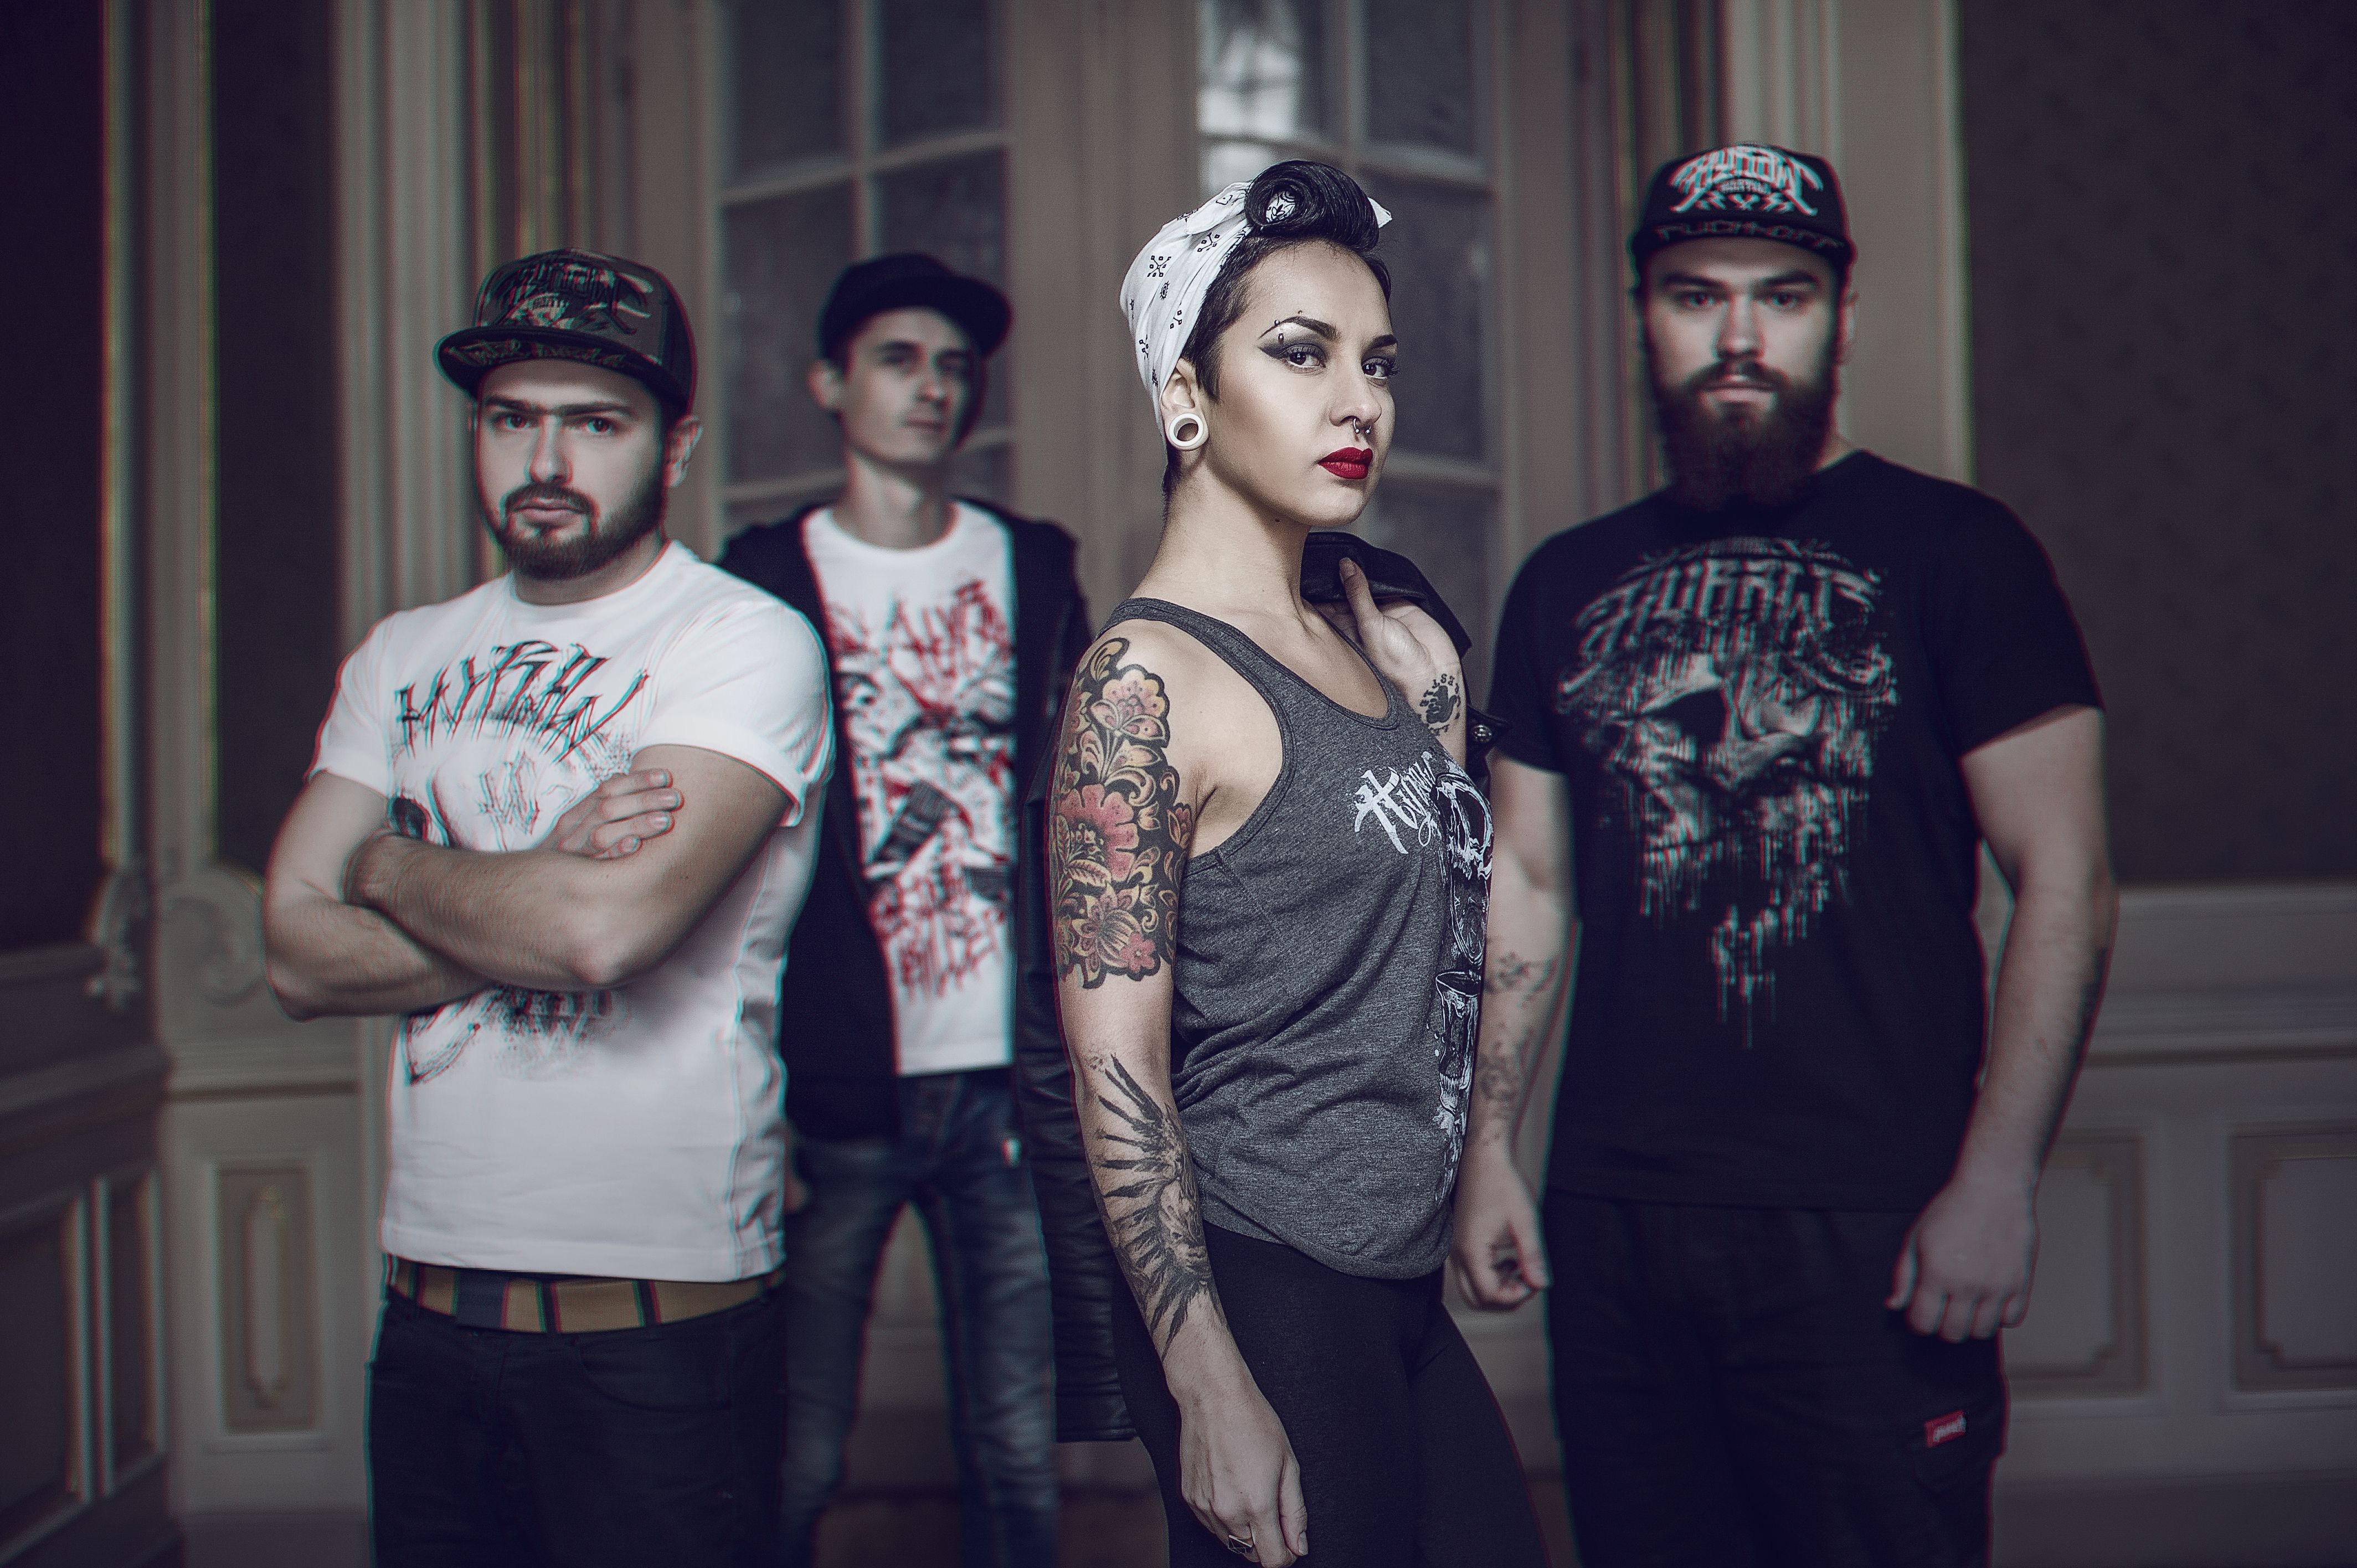 Interview with Jinjer